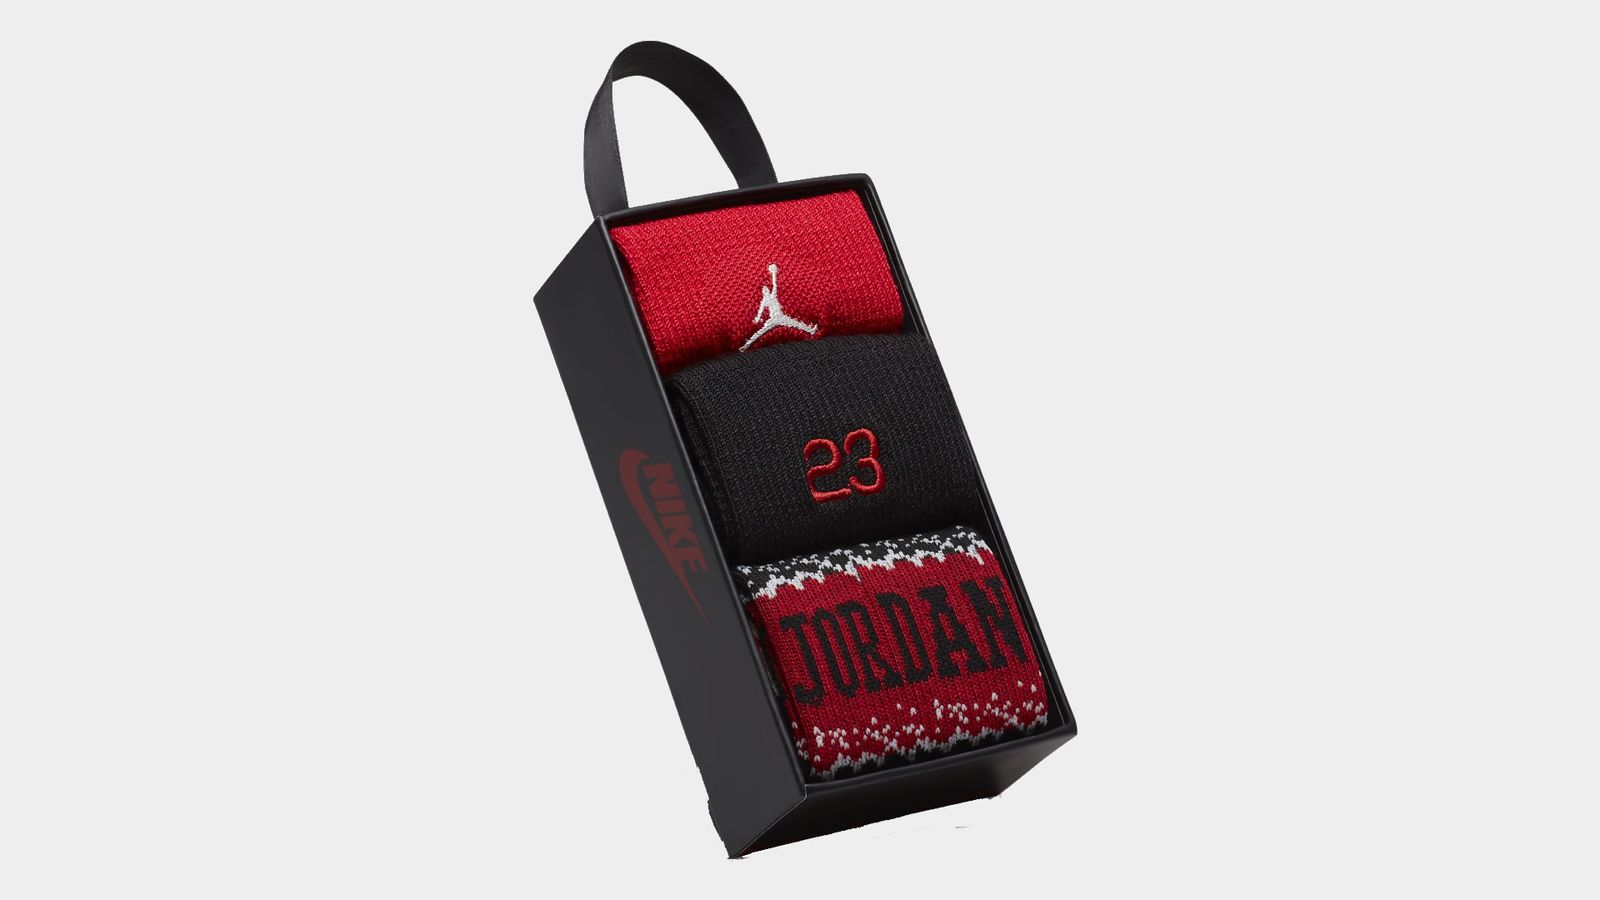 Jordan MJ Holiday Crew Socks product image of a black box with red, black, and dark red socks inside.